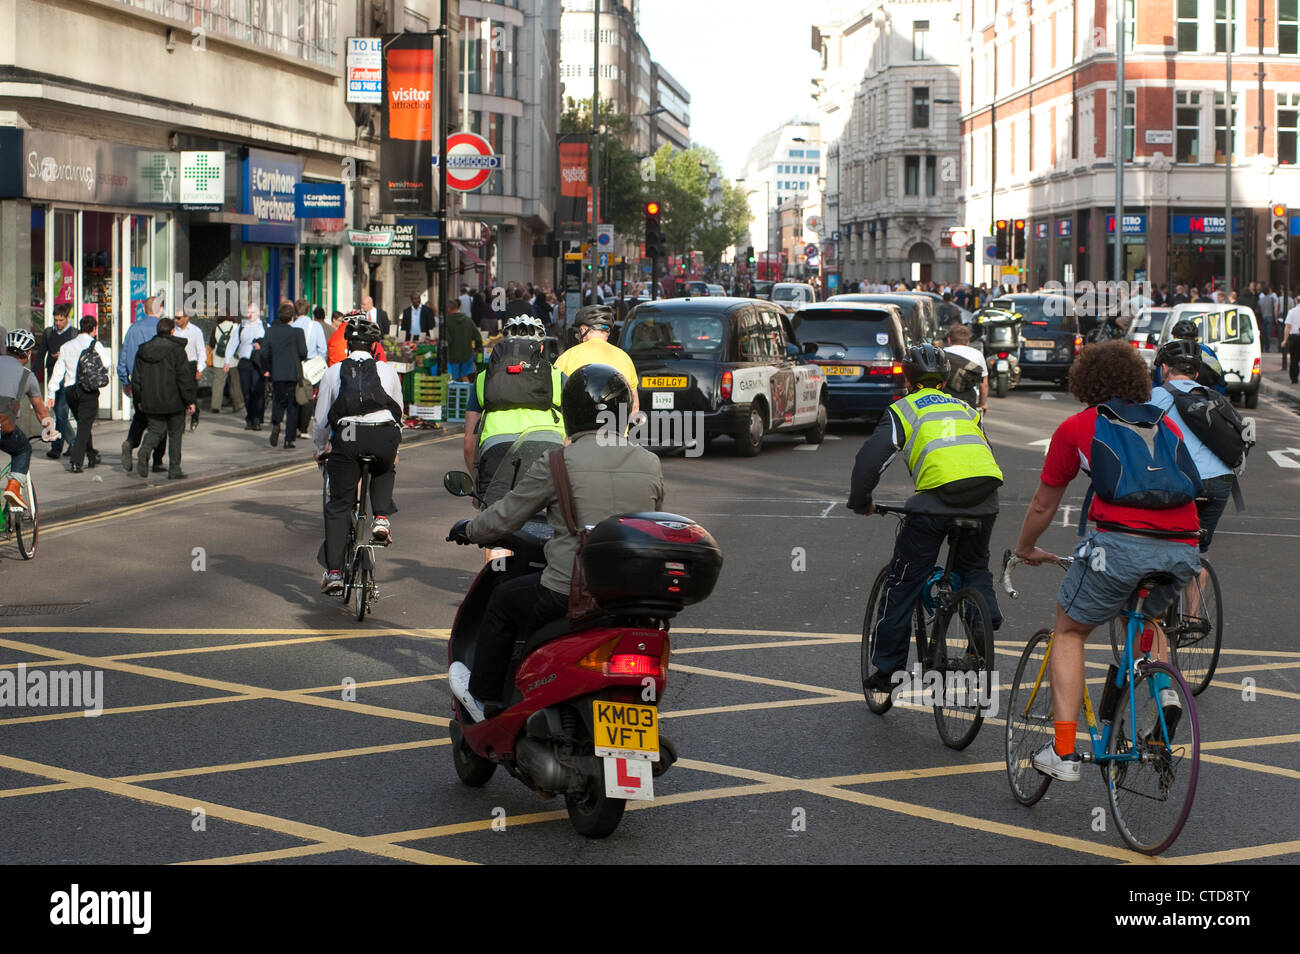 Busy Street London Traffic Jam Hi Res Stock Photography And Images Alamy